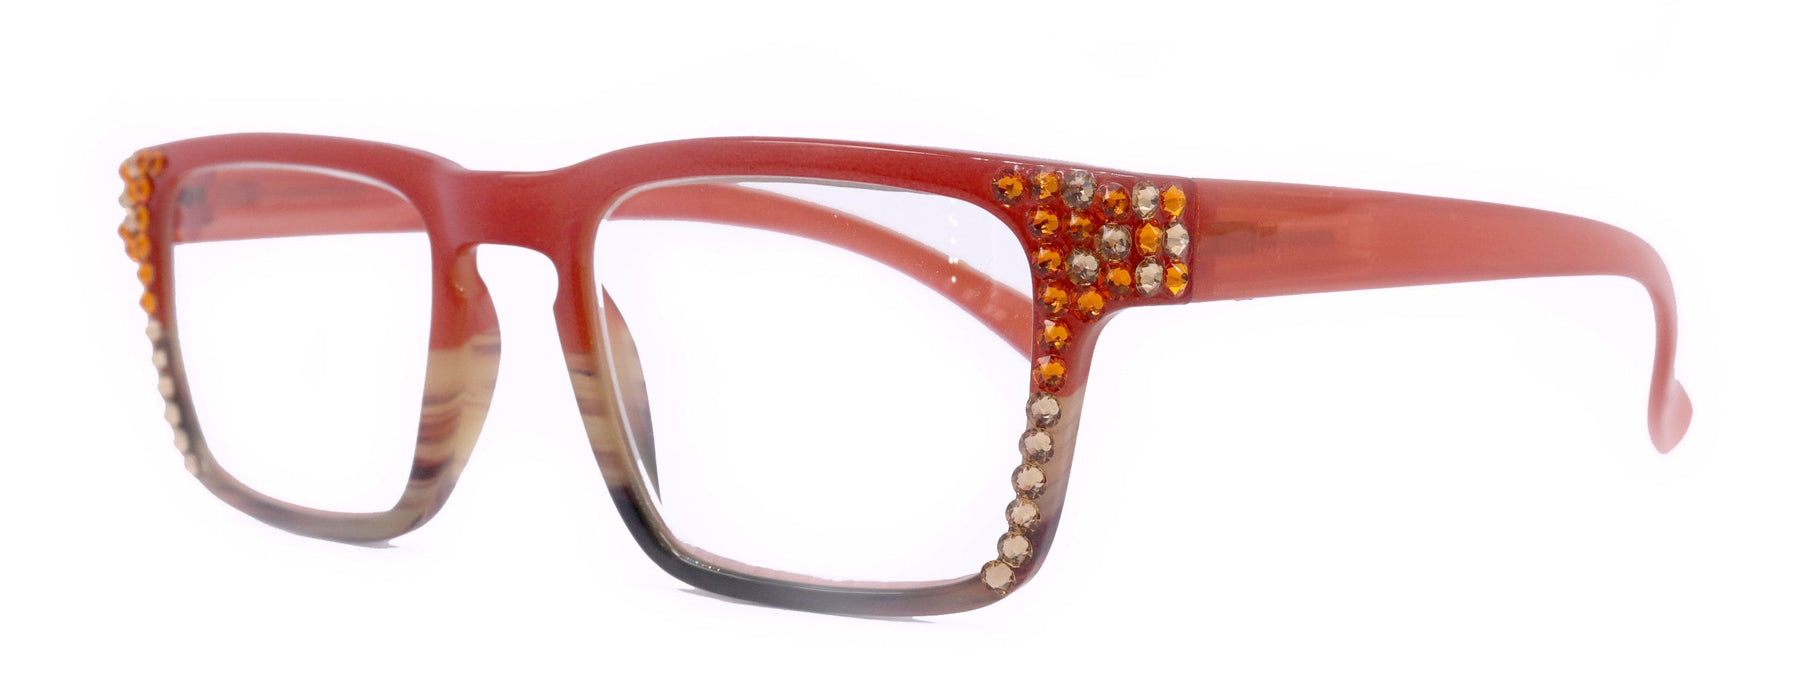 Piper, (Bling) Reading Glasses for Women W (Tangerine, L. Colorado) Genuine European Crystals. (Orange Brown Faded Stripes) NY Fifth Avenue